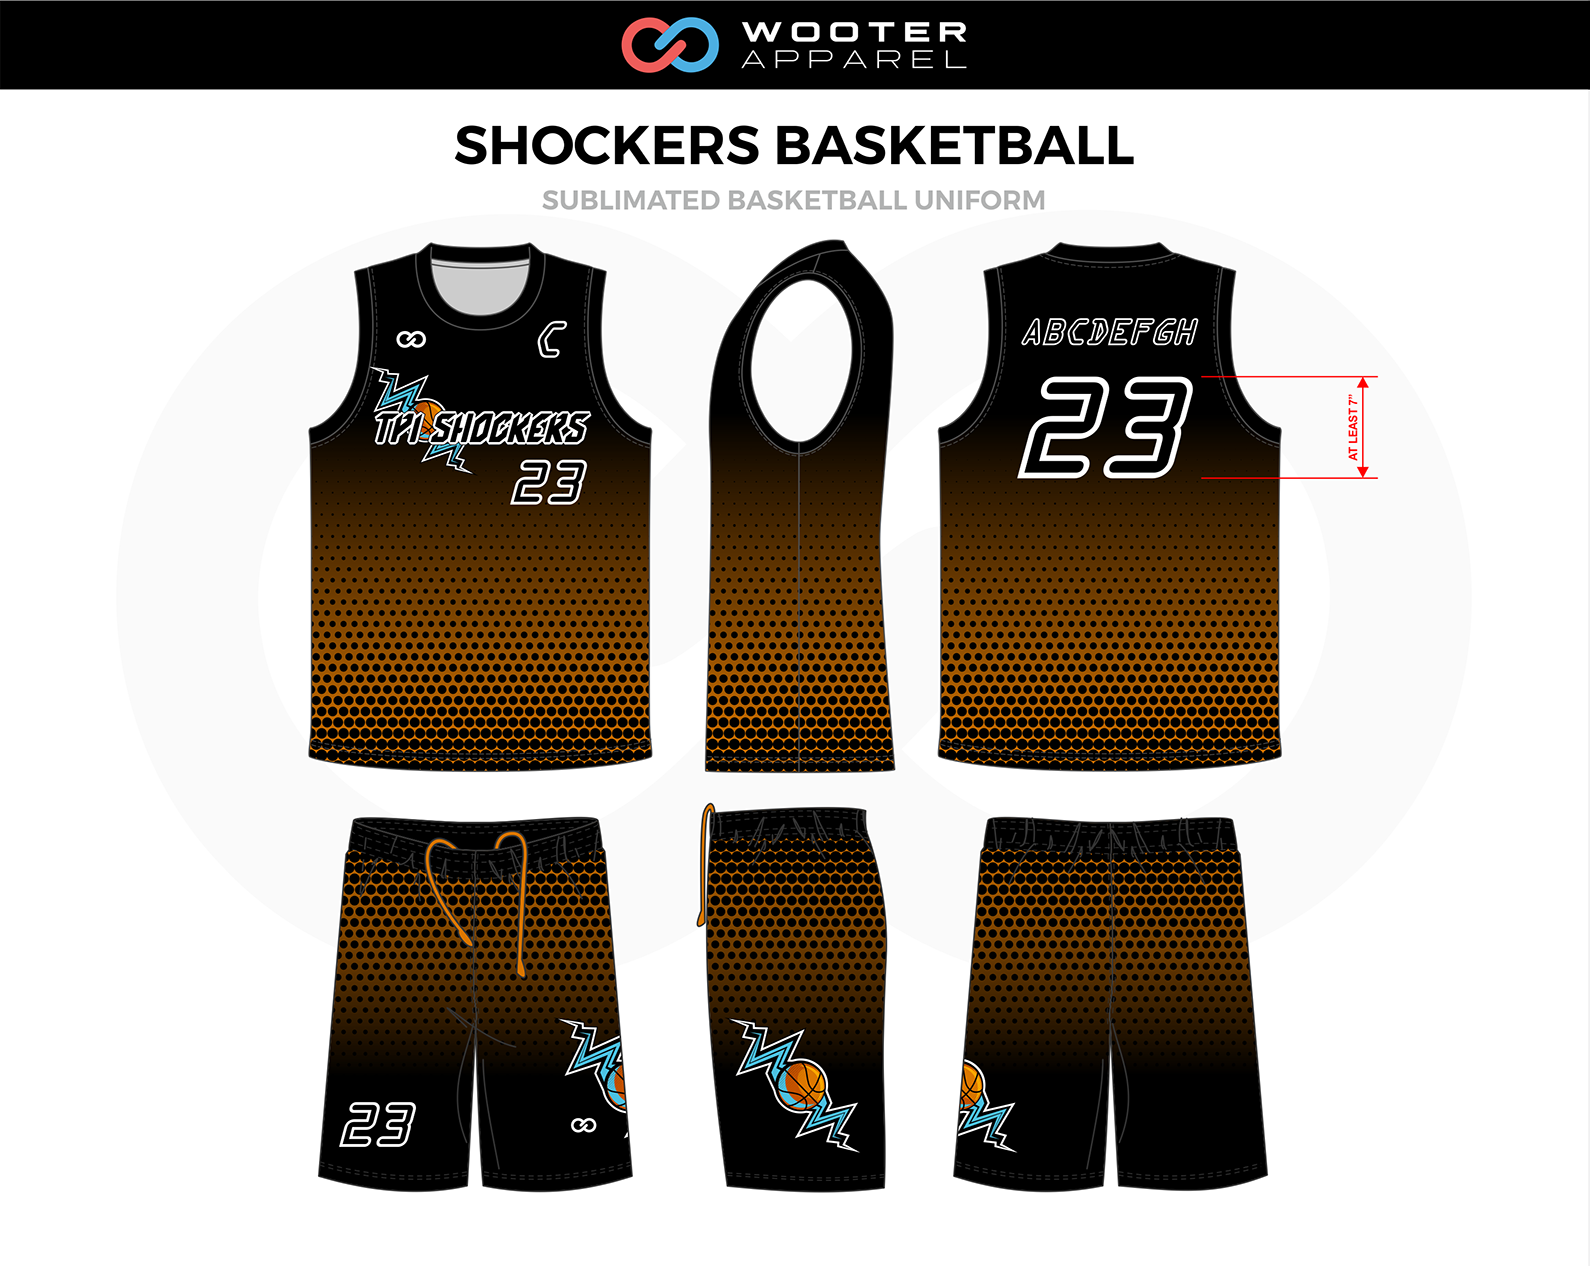 basketball jersey color brown